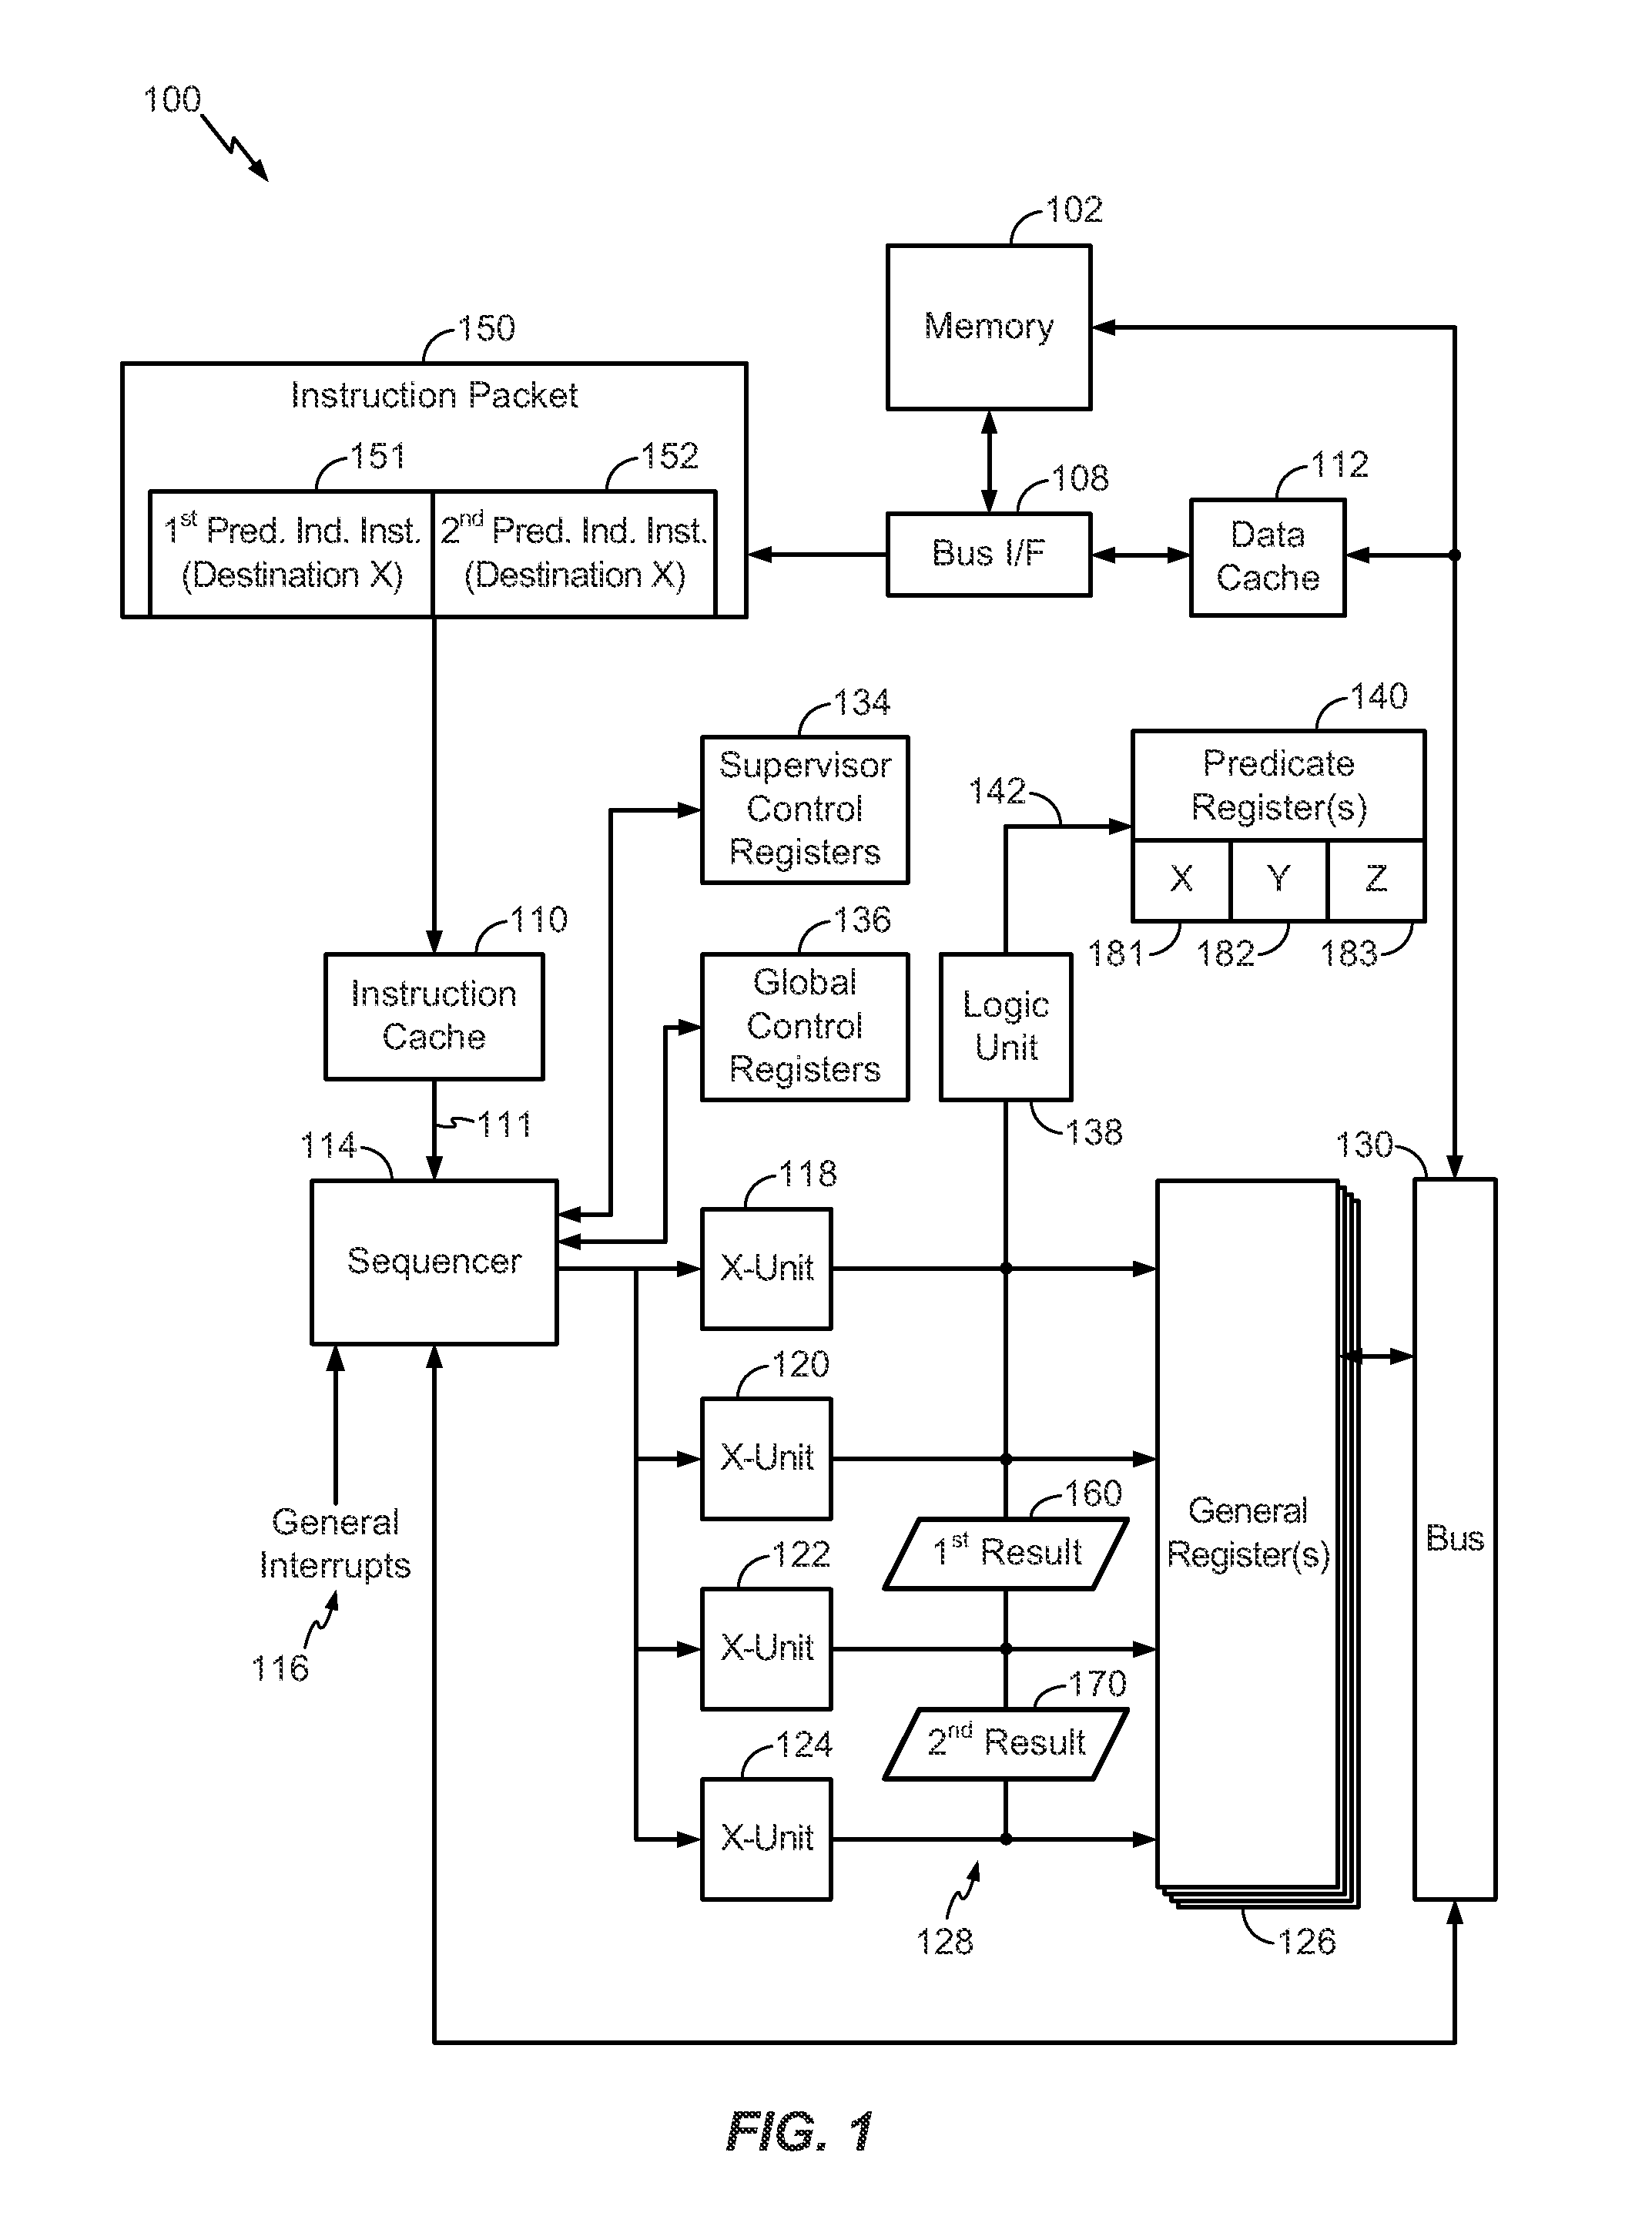 Instruction packet including multiple instructions having a common destination